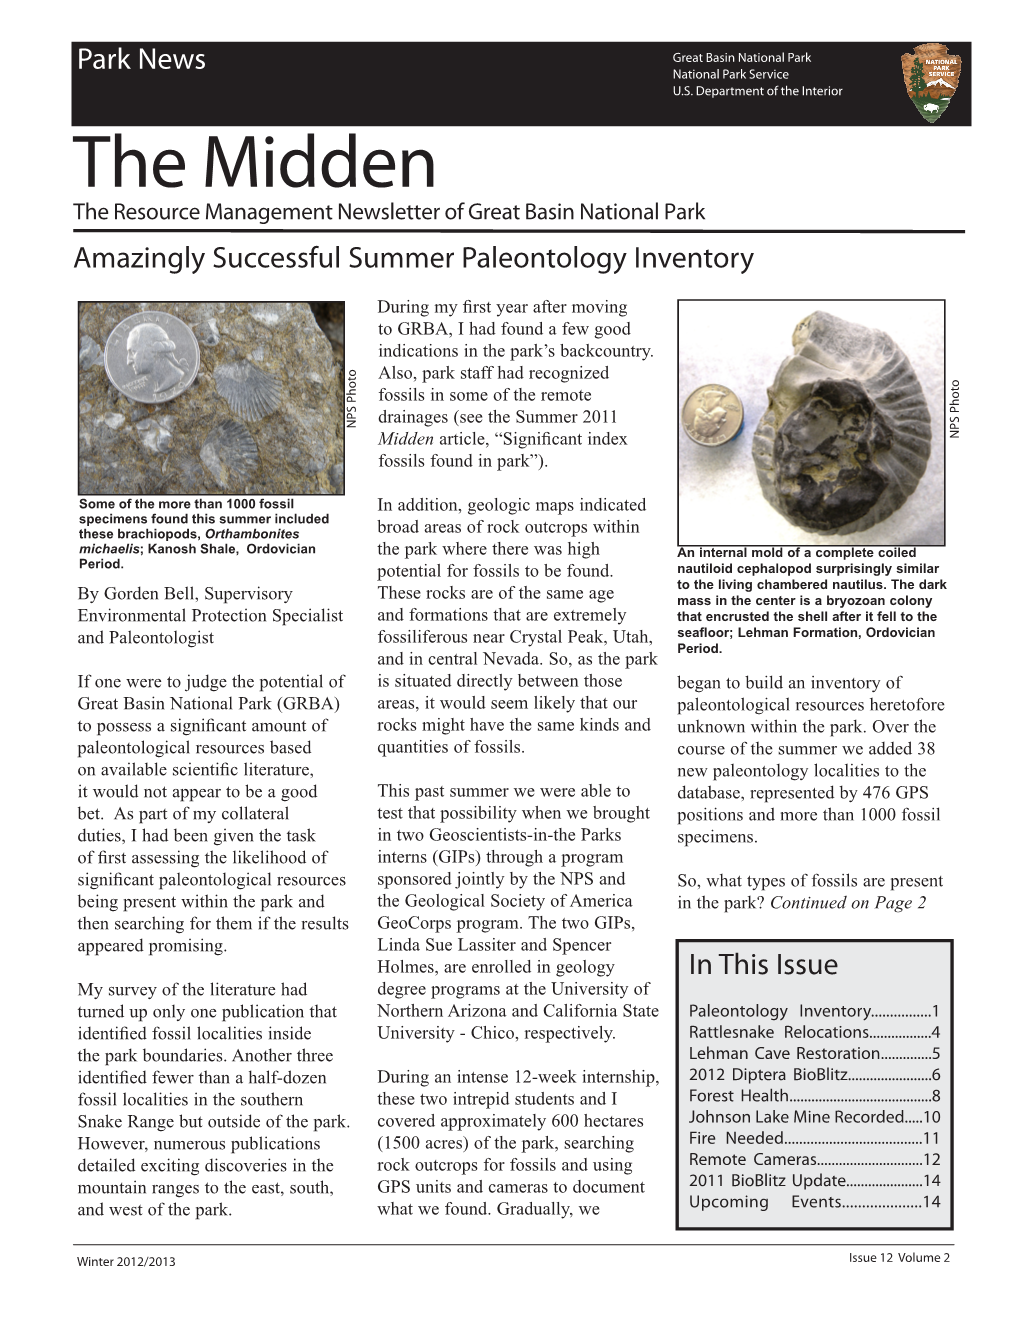 Winter 2012/2013 Issue 12 Volume 2 2012 Summer Paleoinventory Results (Continued) Most of the Fossils Are Animals Organisms